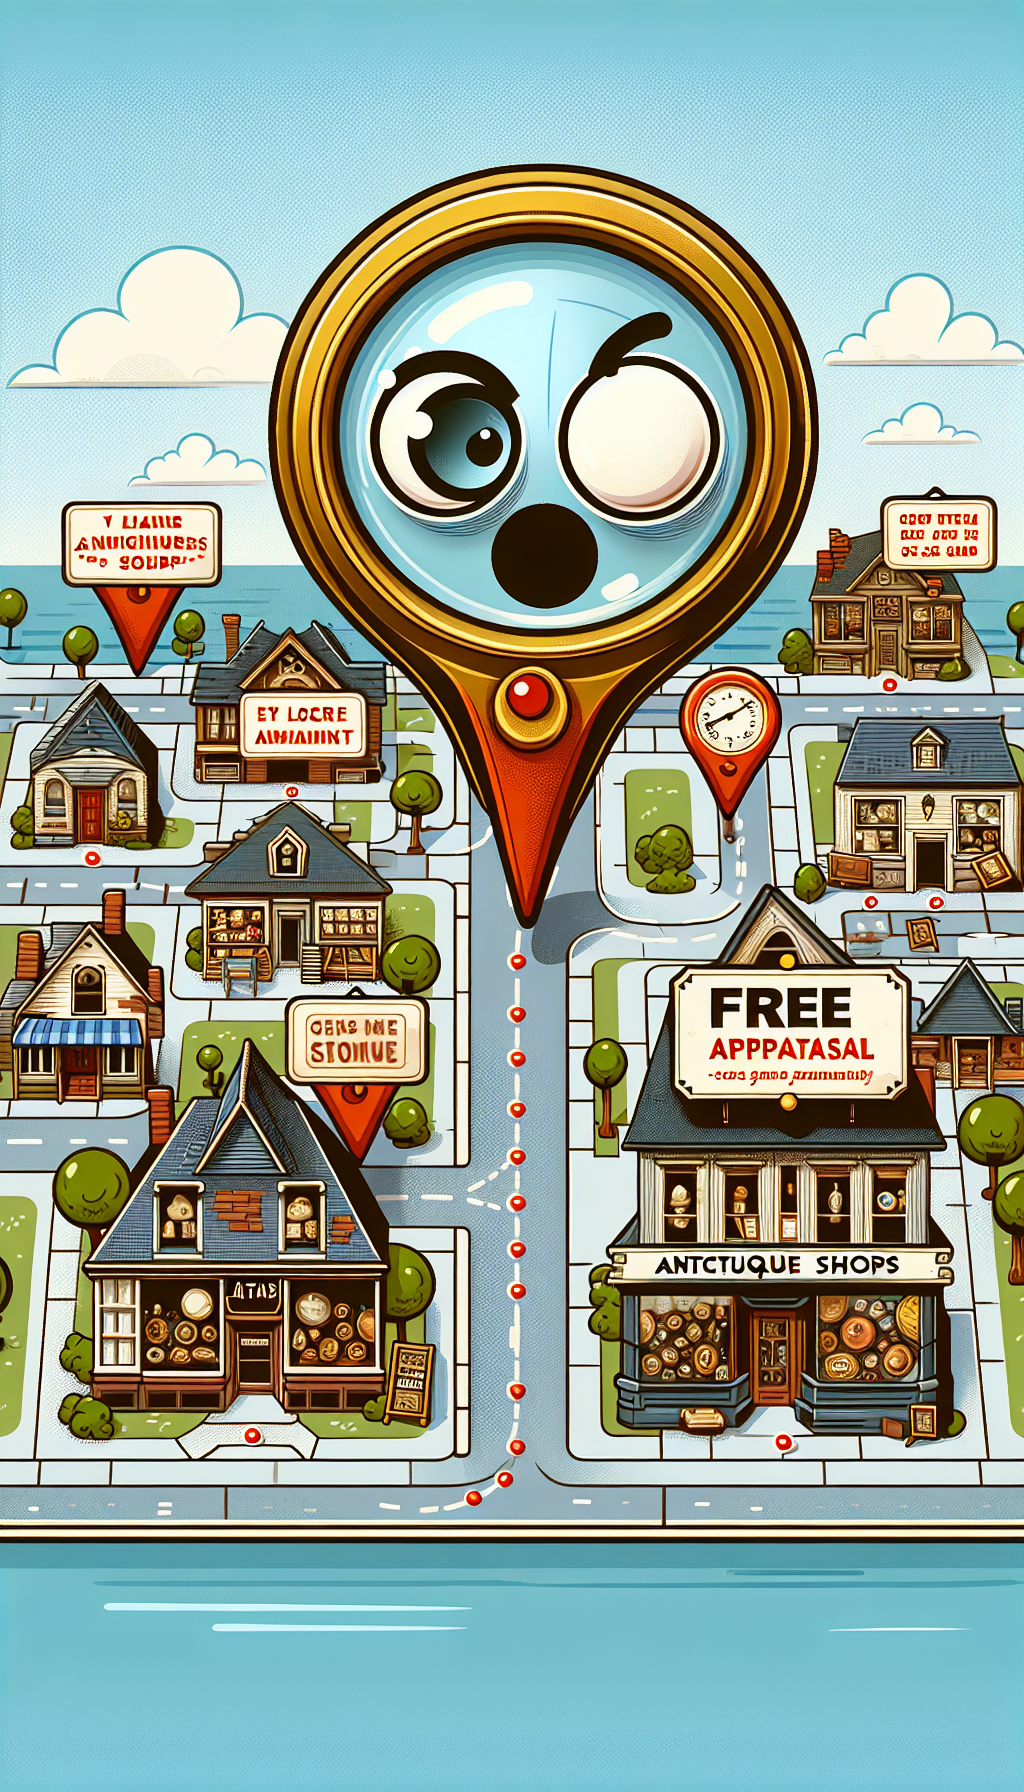 An animated treasure map unfurls to reveal a quaint, bustling town. Local antique shops, marked by magnifying glass icons, entice with "Free Appraisal" signs. A dotted line guides viewers to a user’s location pin with expressive, cartoonish eyes, symbolizing the search for nearby services. Each shop exudes a vintage aura, with prized antiques displayed in their windows, inviting a journey of local discovery.